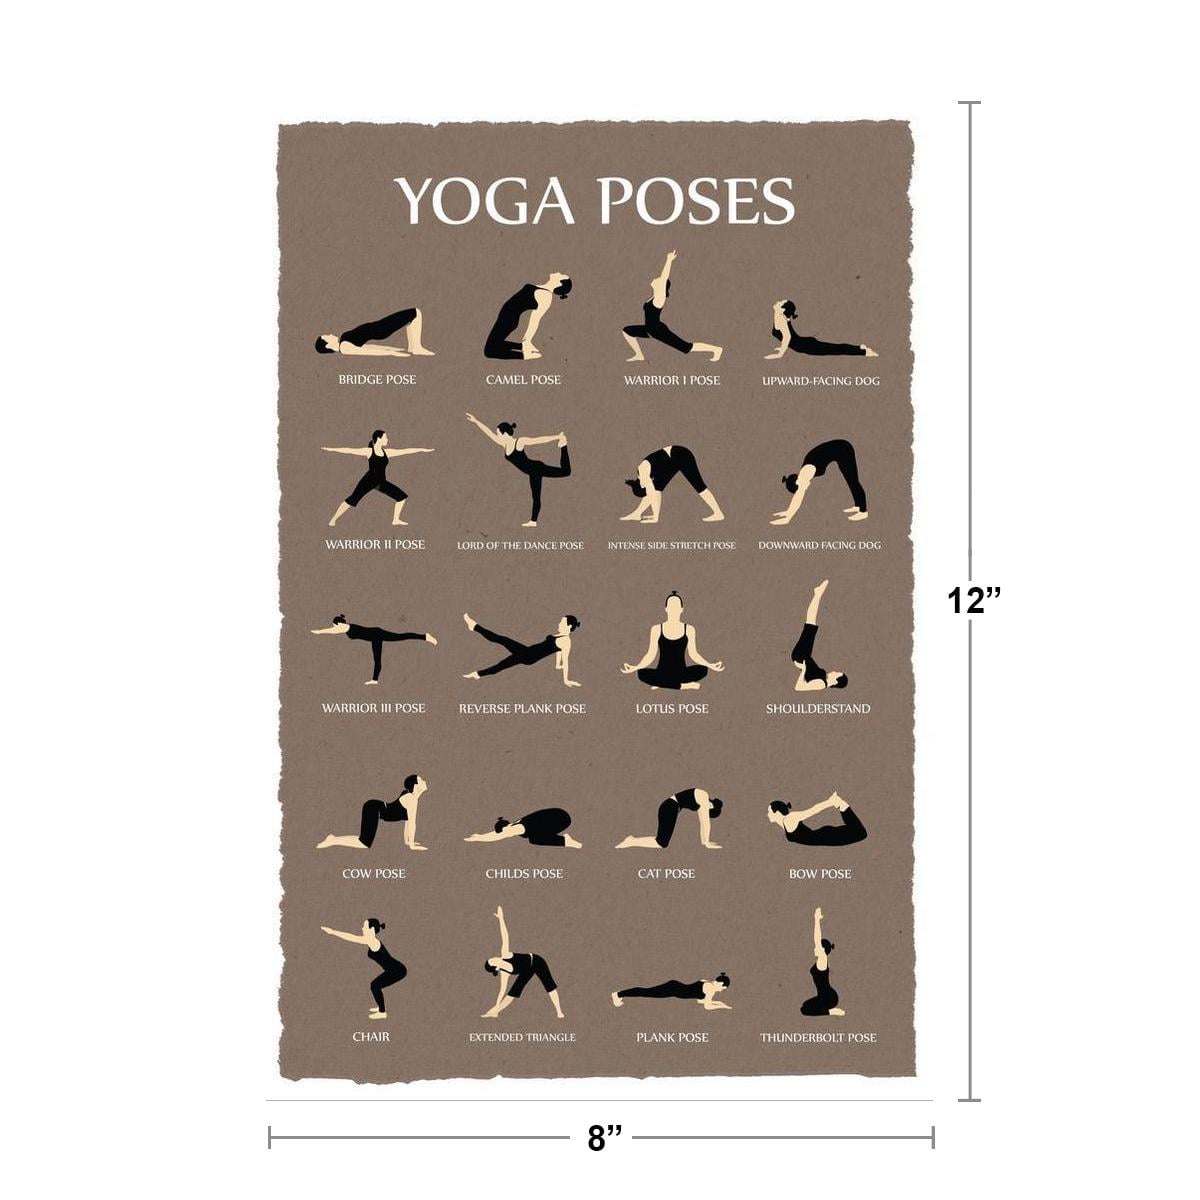 Controversial Yoga Poses I Still Love to Practice (and Why)